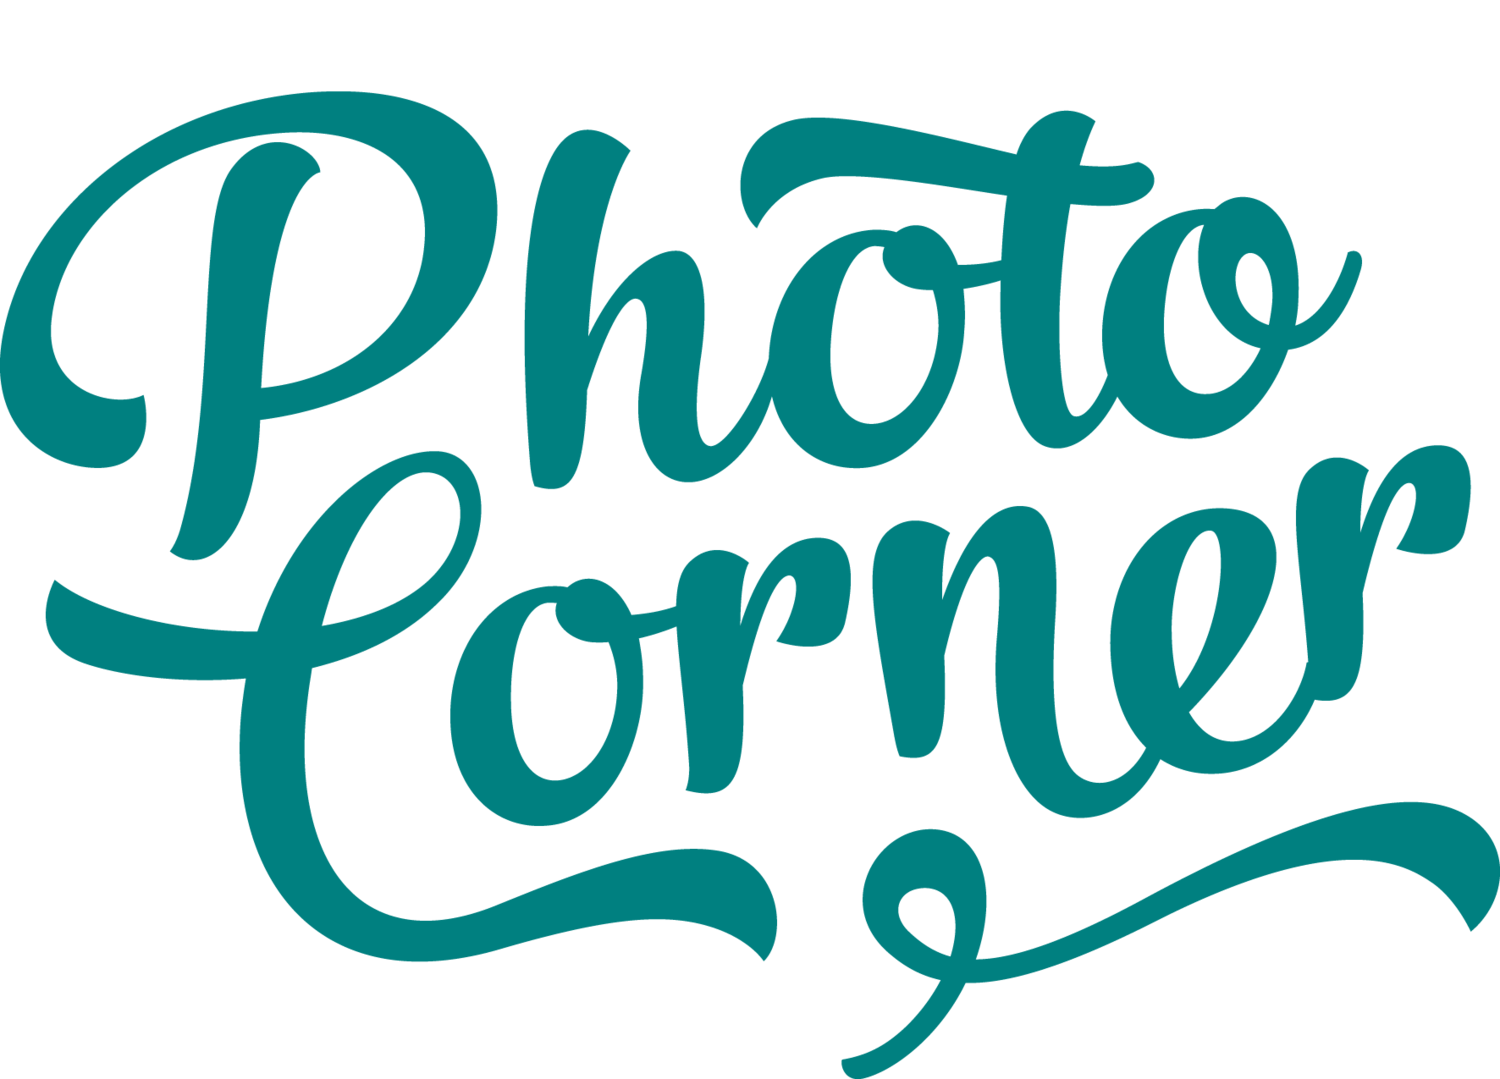 Photo corner booth hire. Photography clipart photobooth